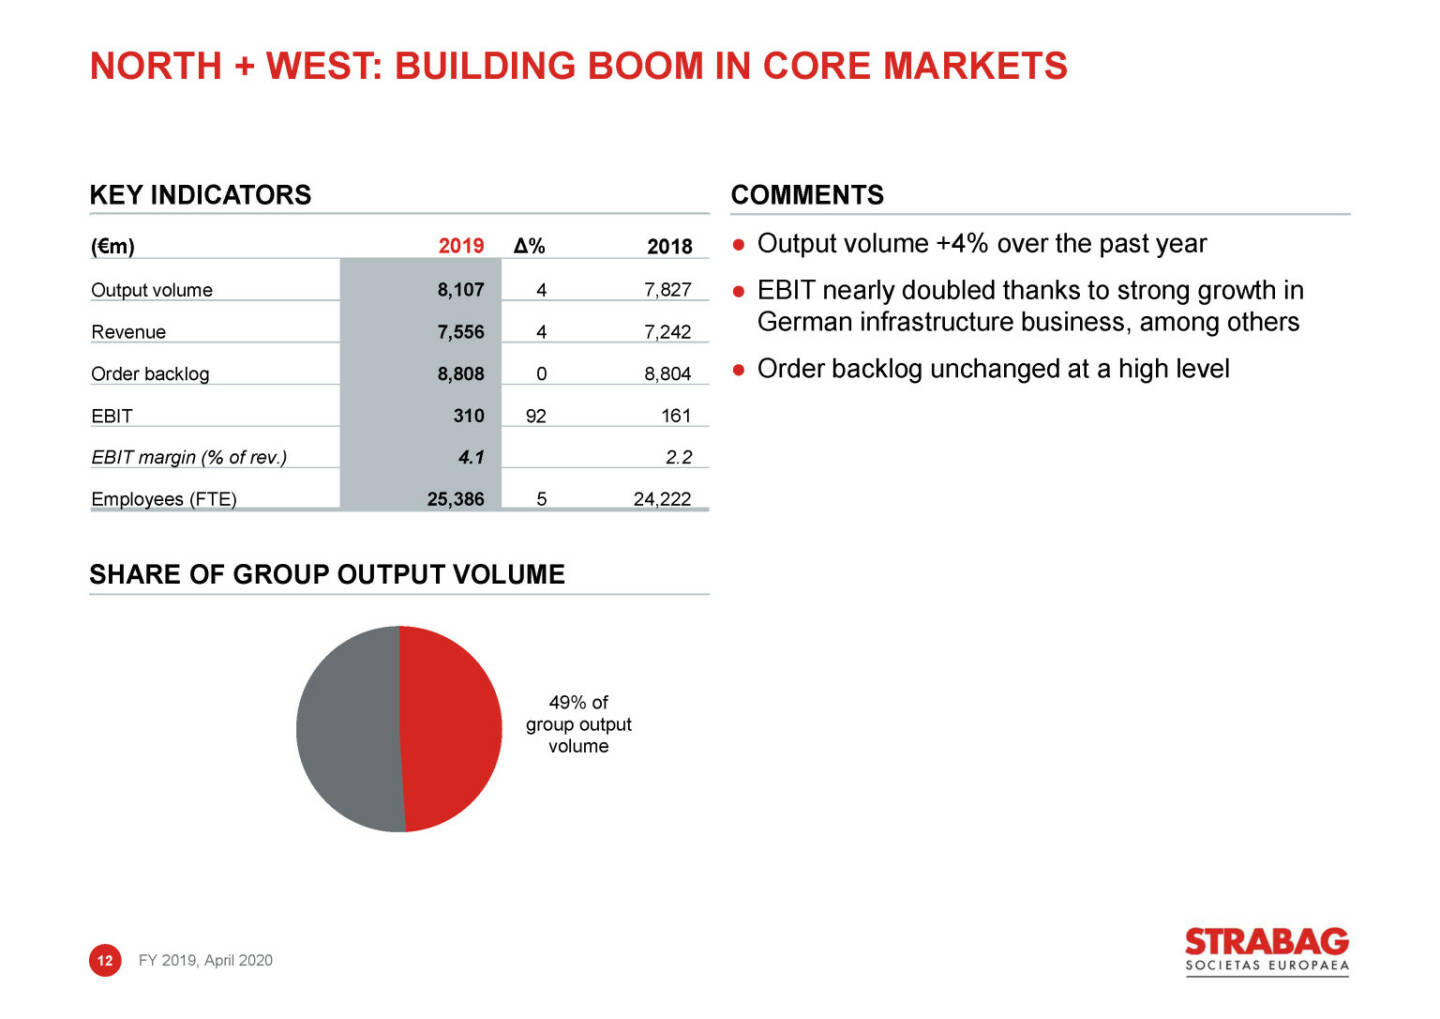 Strabag - north + west: building boom in core markets